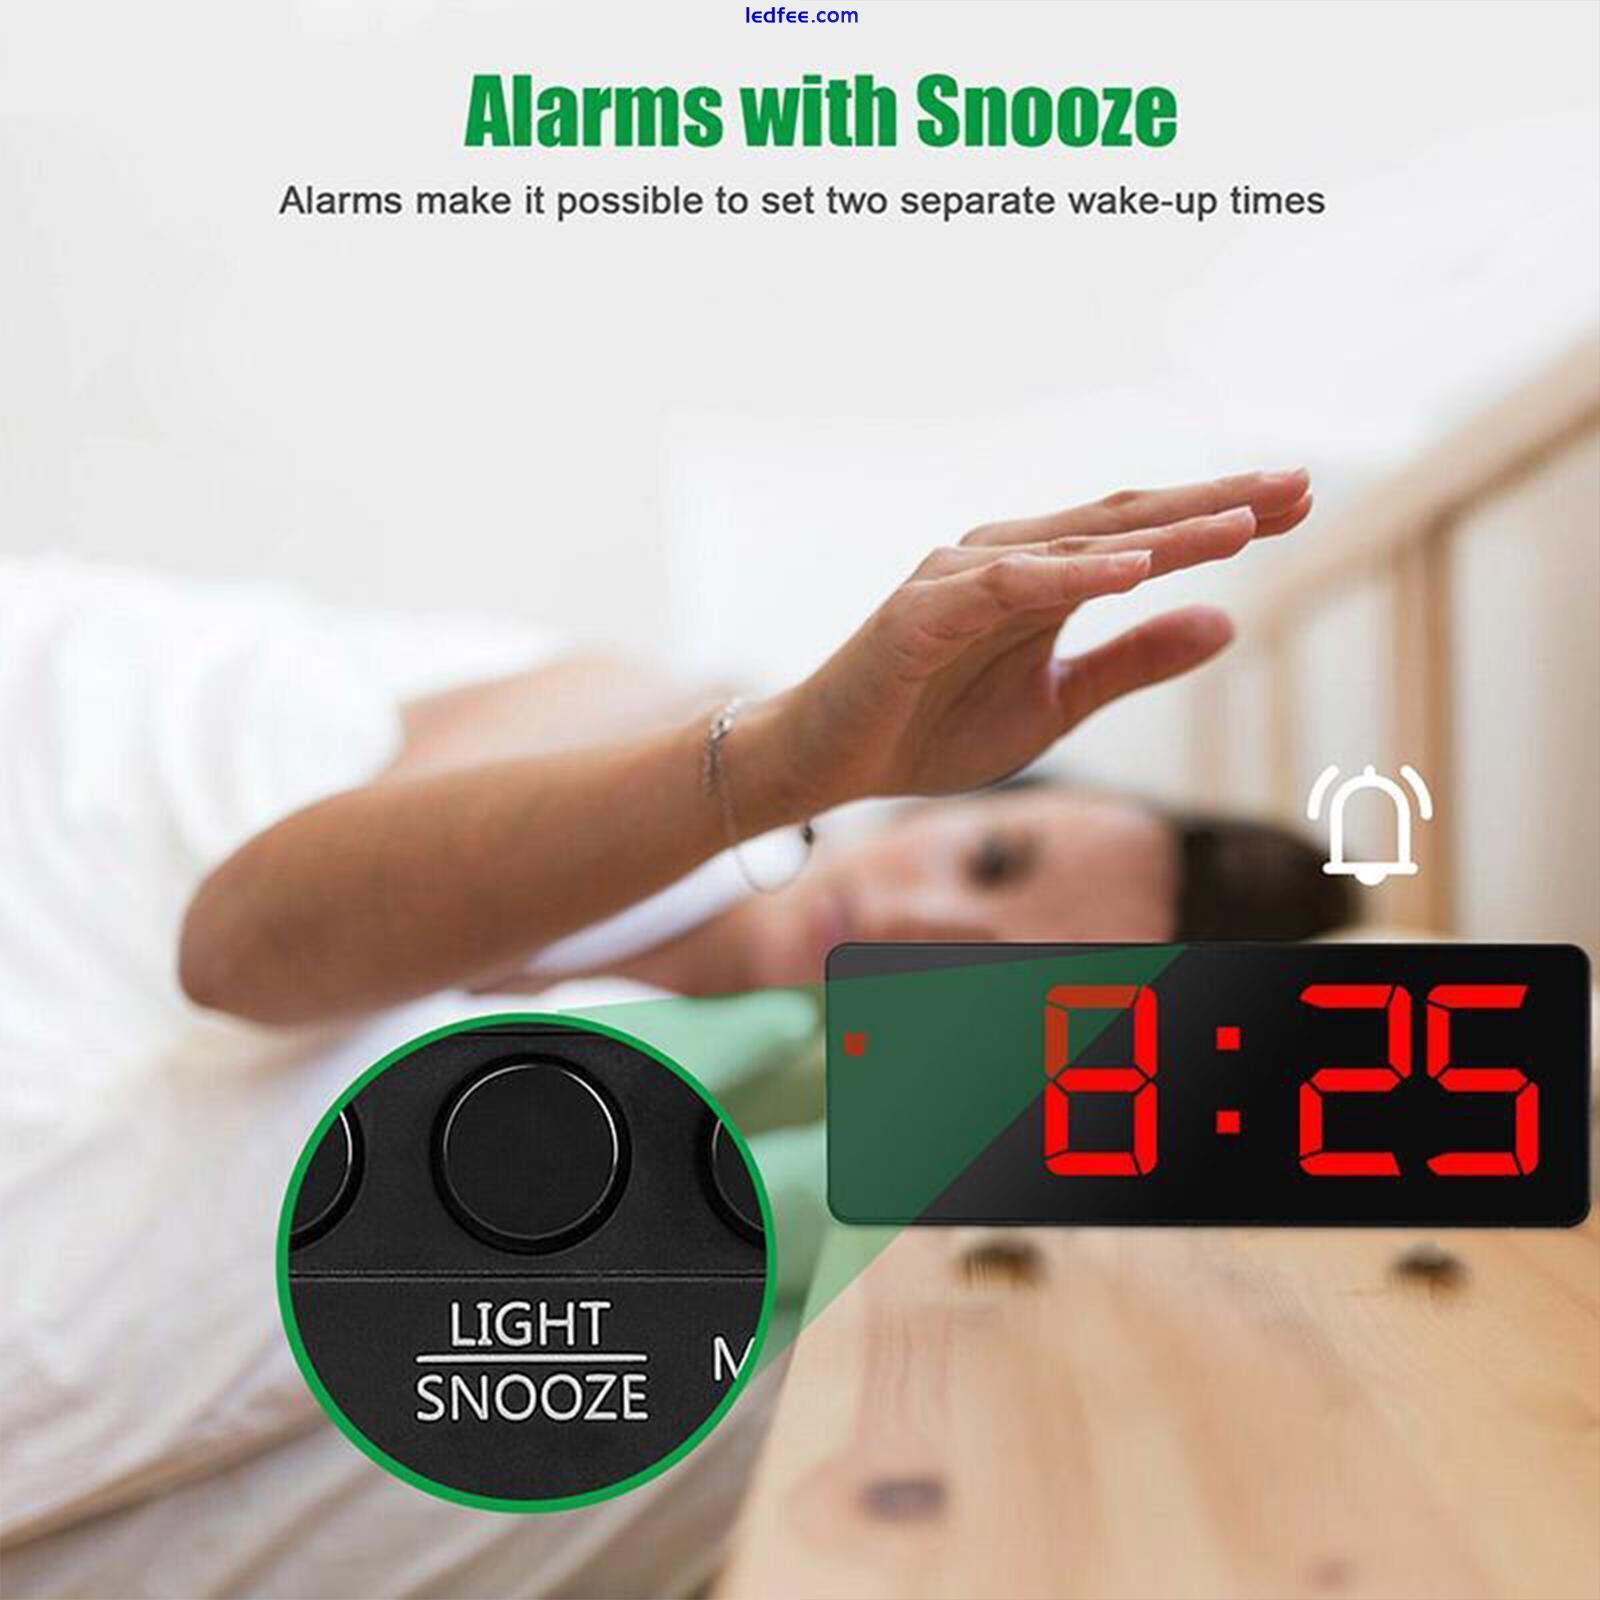 Large LED Mirror Alarm Clock with USB Temperature Display and Snooze σ: 2 